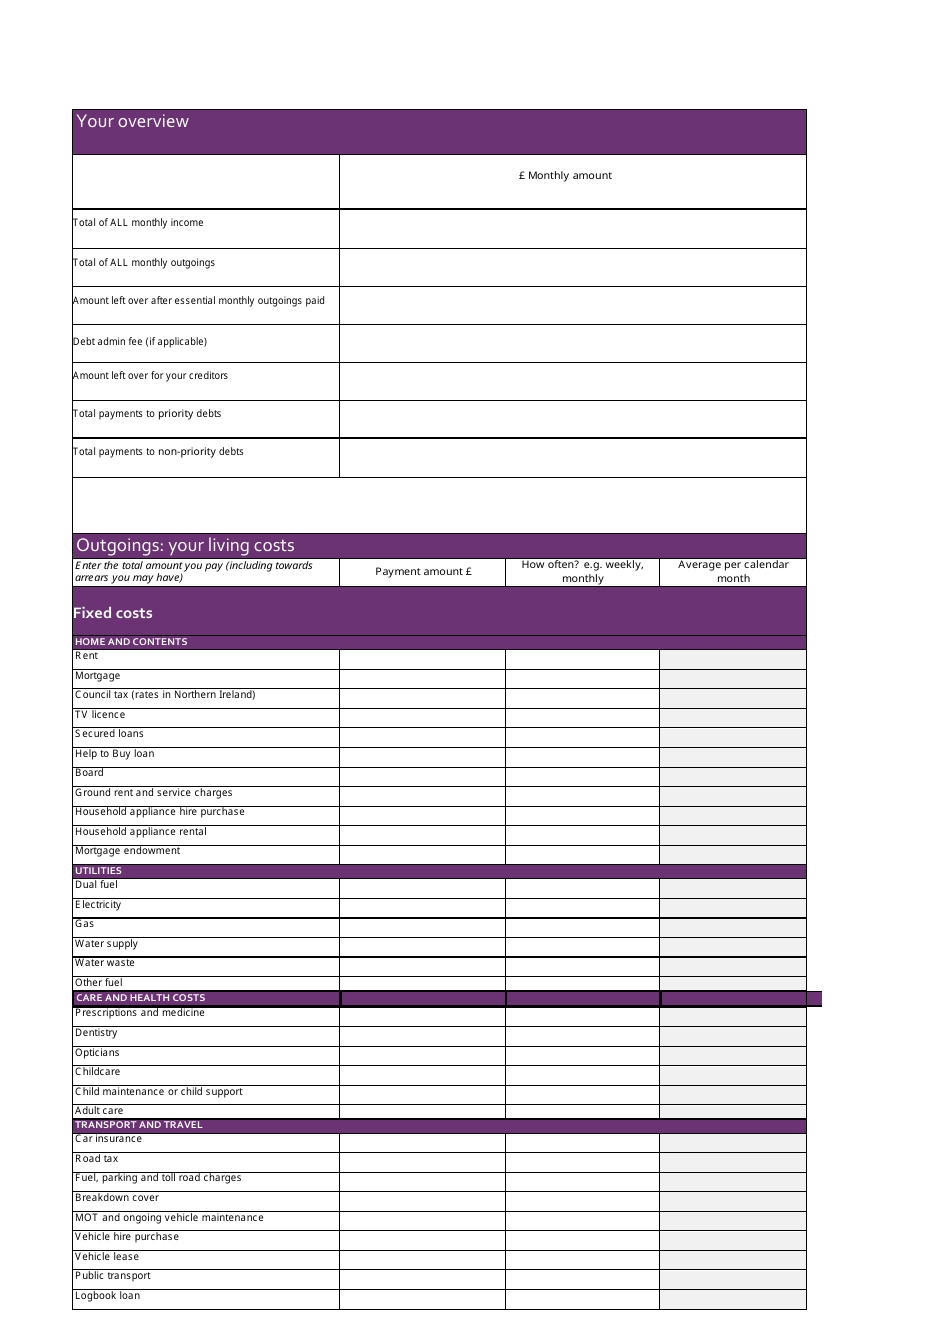 Monthly Budget Planner Template (British Pounds) - Violet, Page 1